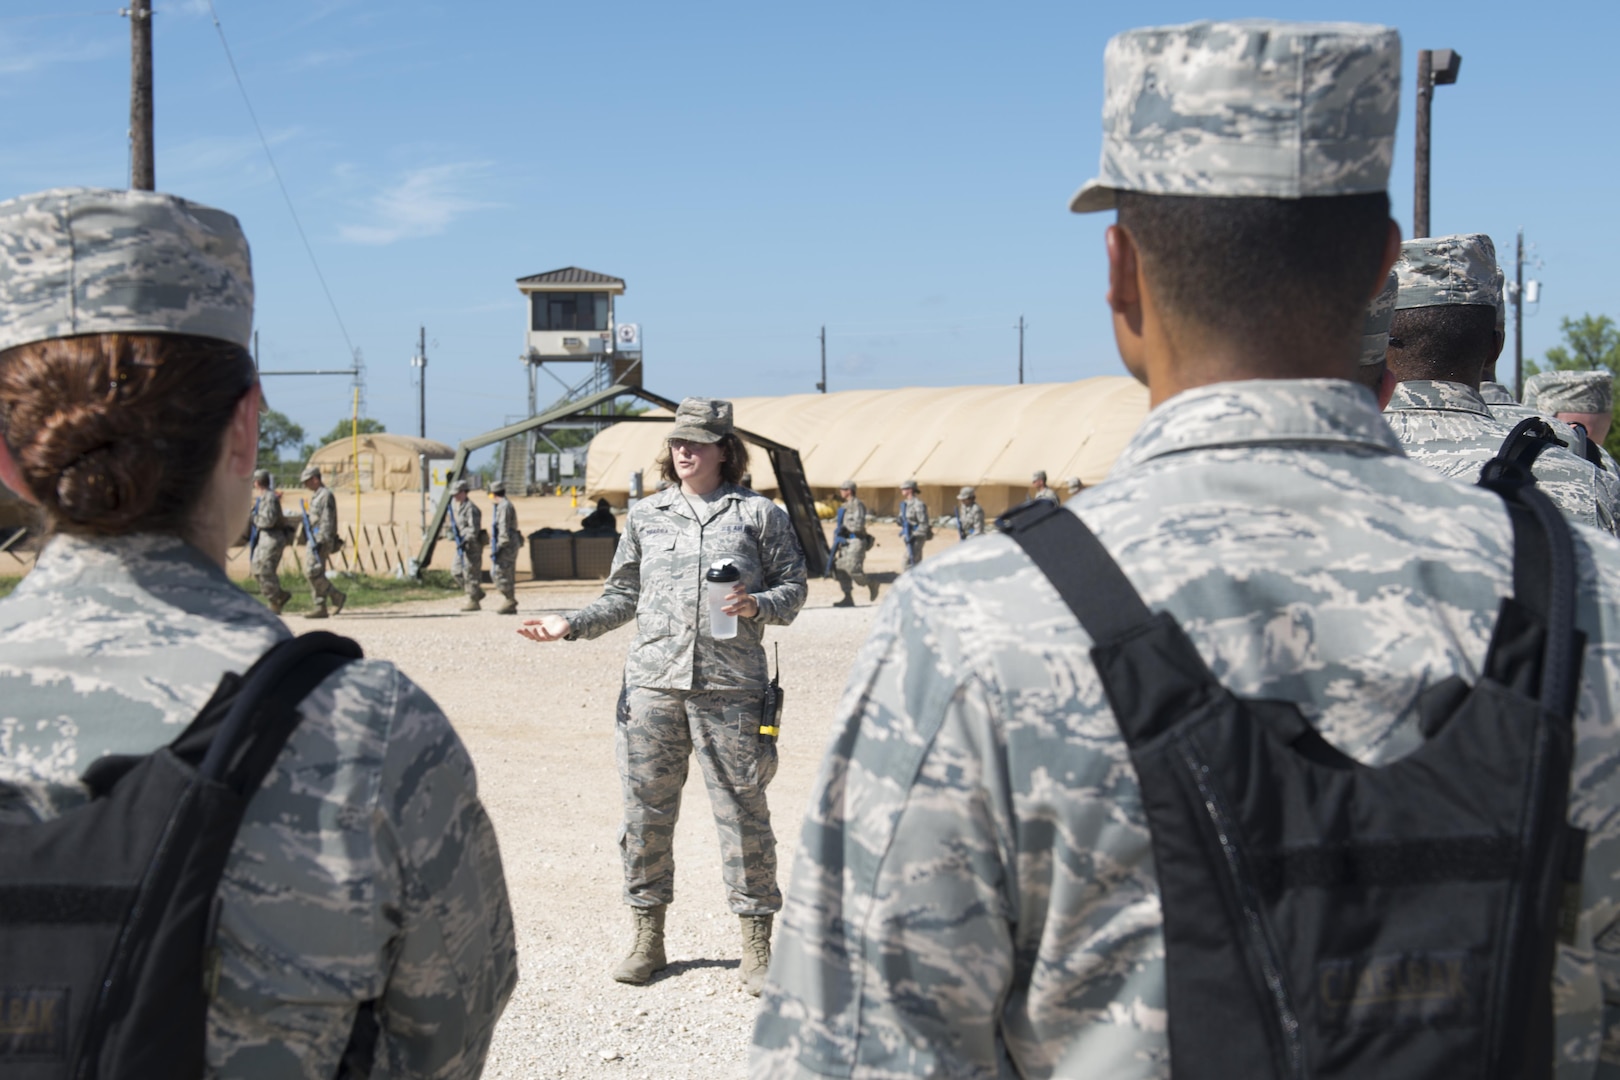 Master Sgt. Crystal Ybarra, 319th Training Squadron military training instructor, provides a tour to chaplain candidates of the Basic Expeditionary Airmen Skills Training at Joint Base San Antonio-Lackland, Texas, July 5, 2017. The tour was part of the Chaplain Candidate Intensive Internship. (U.S. Air Force photo by Senior Airman Krystal Wright)